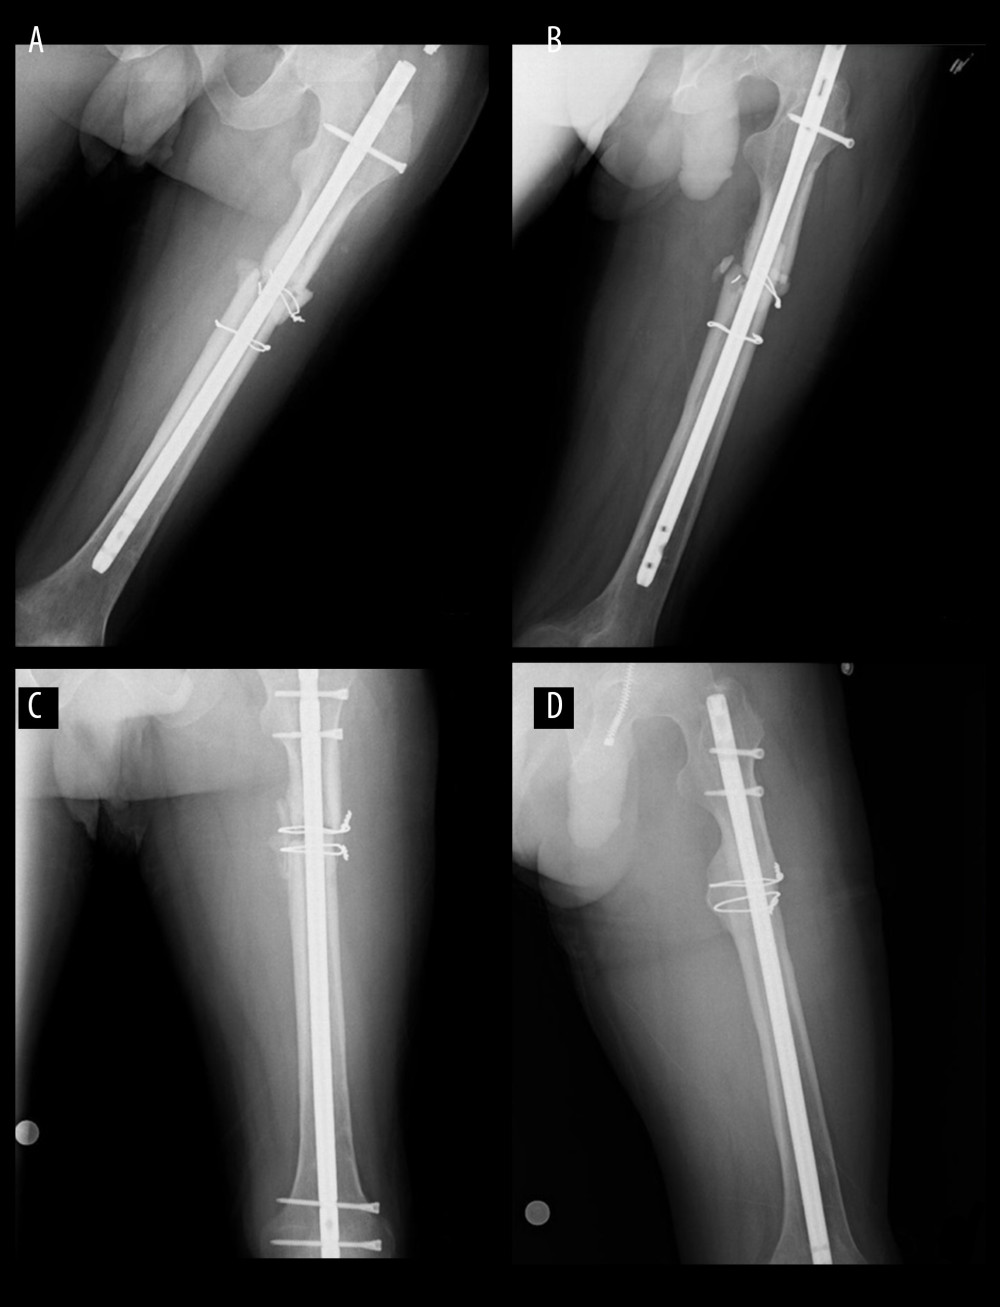 45-year-old male tibial fracture A) postoperative 8th month radiography B) postoperative 8th month radiography C) Decortication – Bone Grafting Method application postoperative radiograph D) postoperative 18th month after decortication – Bone Grafting application radiograph.